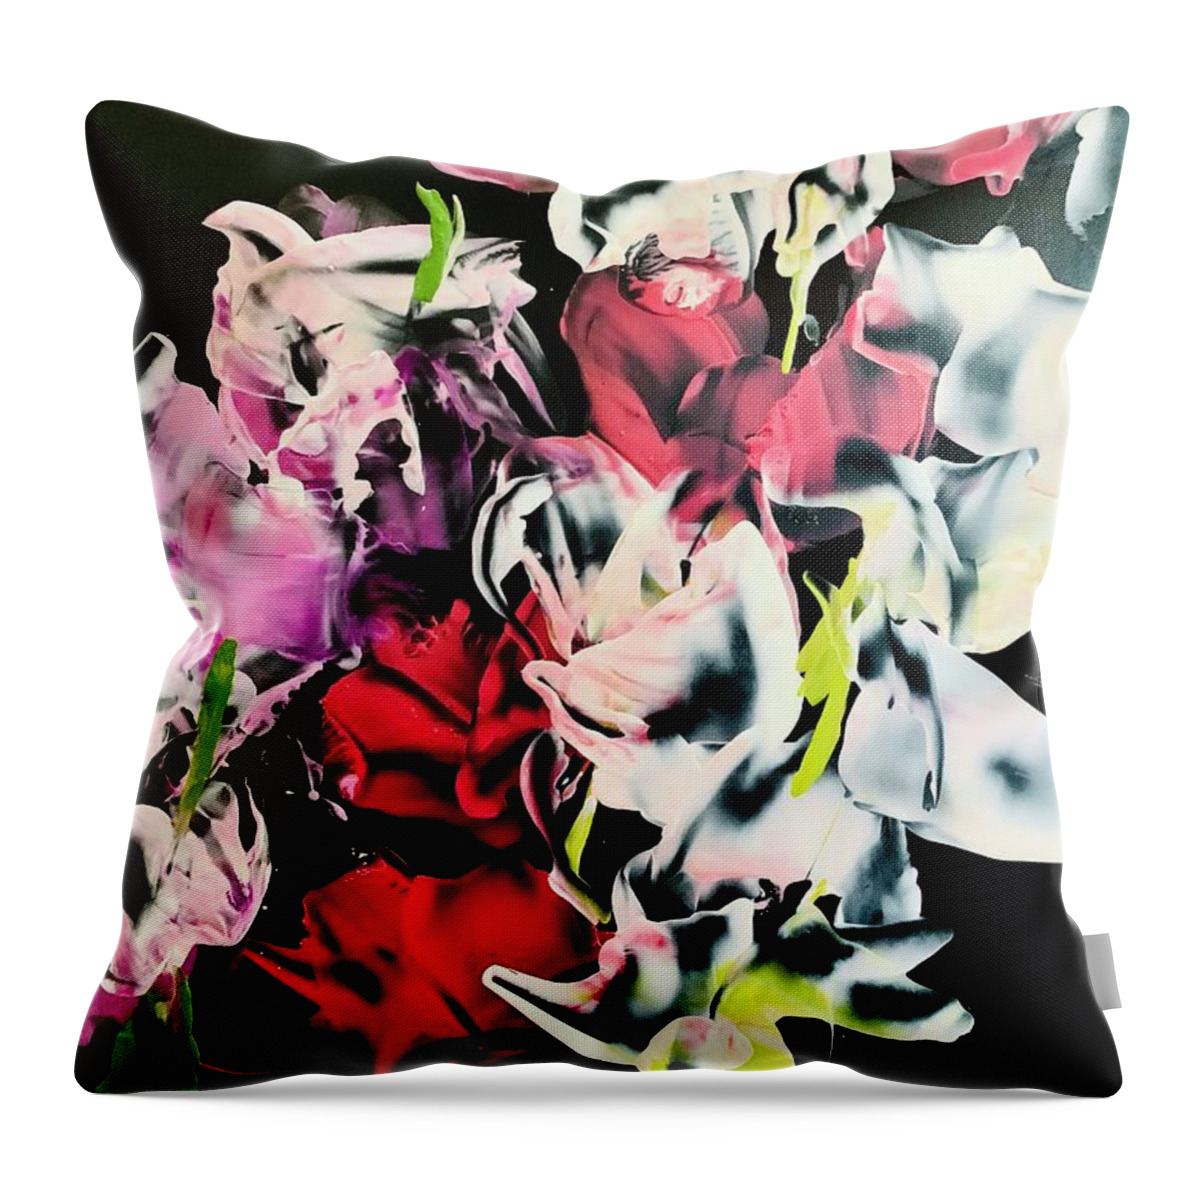 Gladioli Throw Pillow featuring the painting Glads by Tommy McDonell